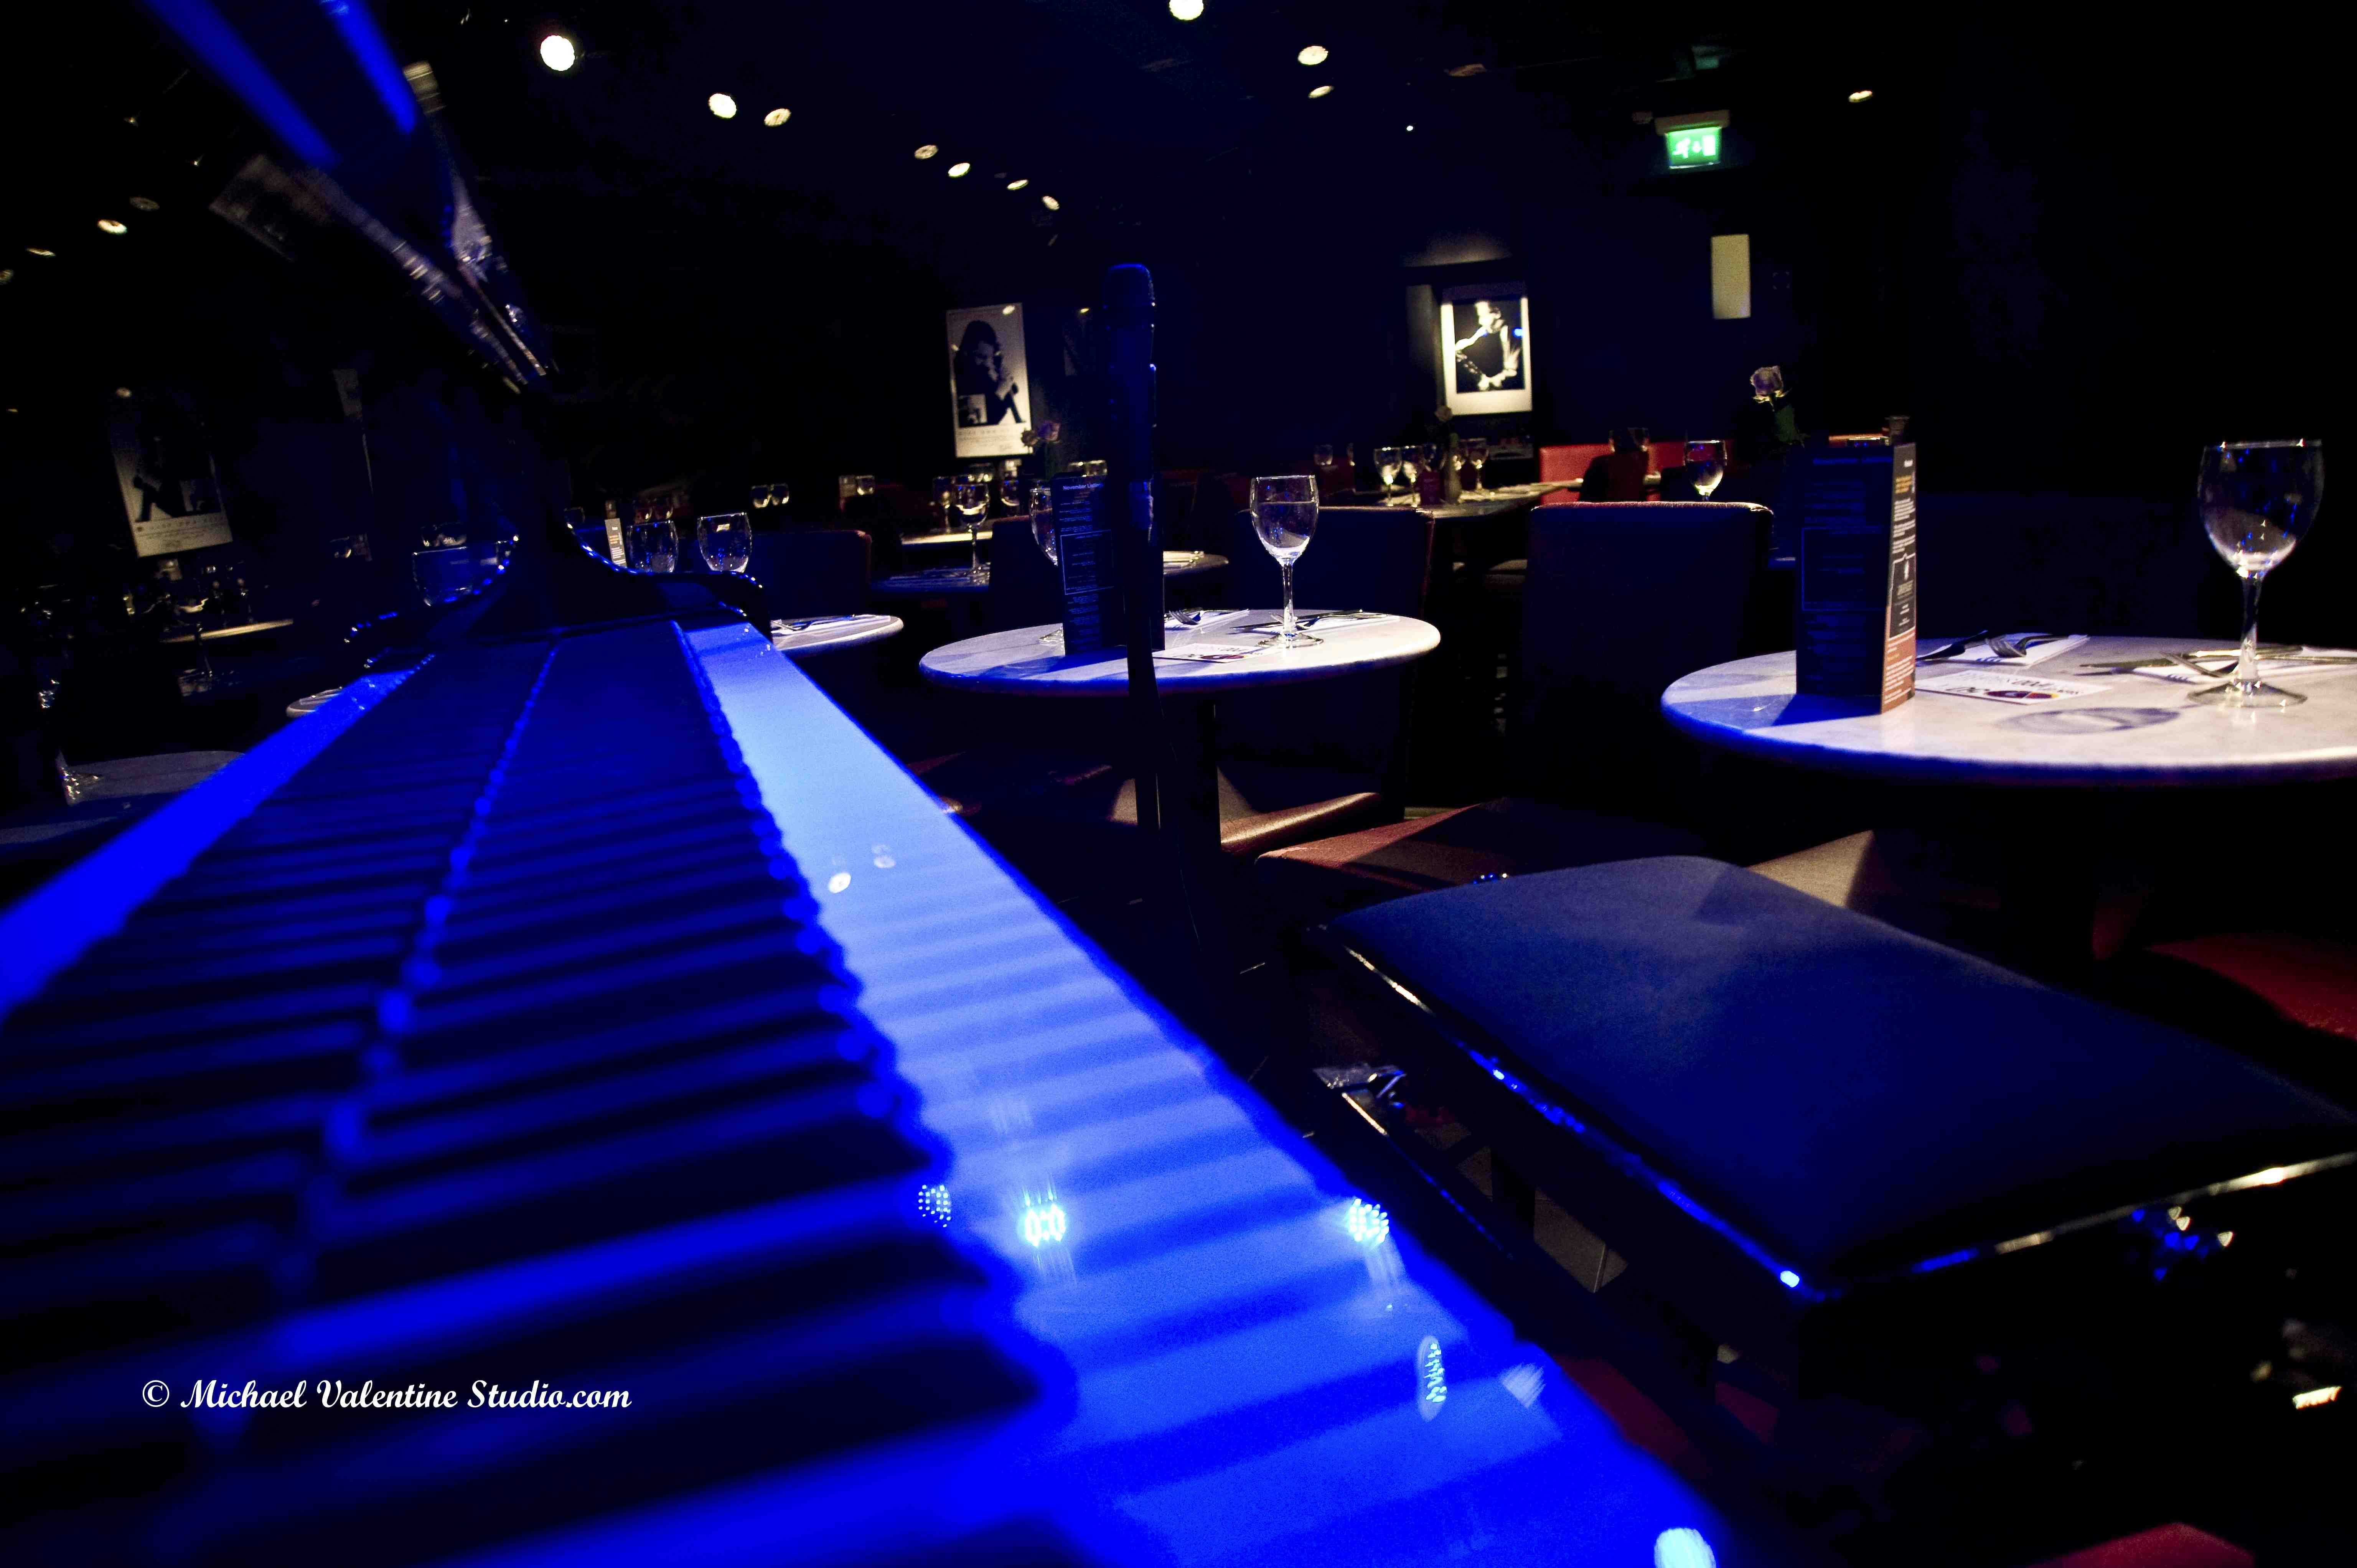 Pizza Express Venues in London - PizzaExpress Dean St & Jazz Room